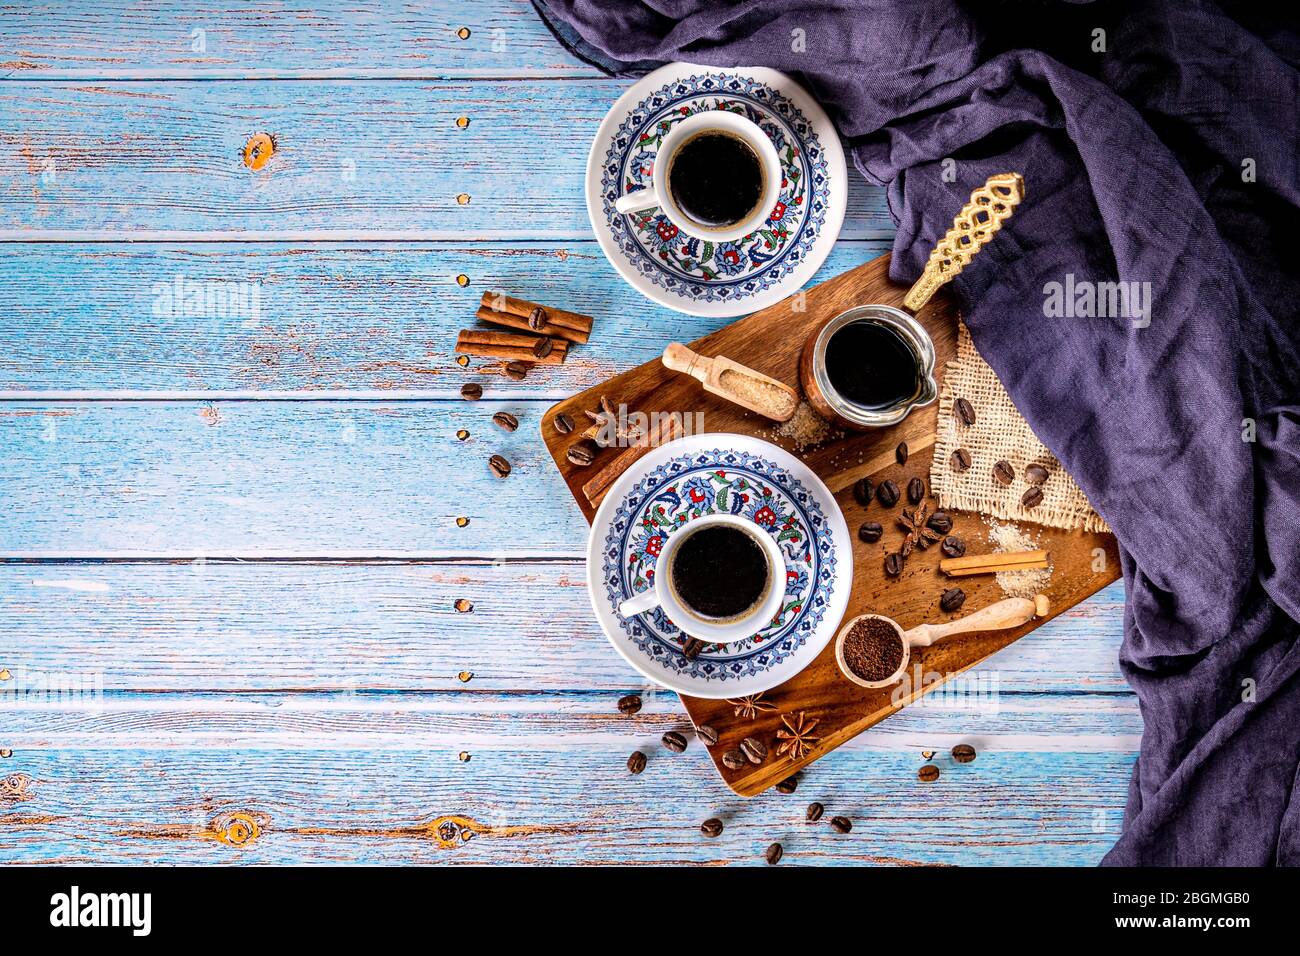 Ground coffee and coffee cups turkish style on blue background Stock Photo